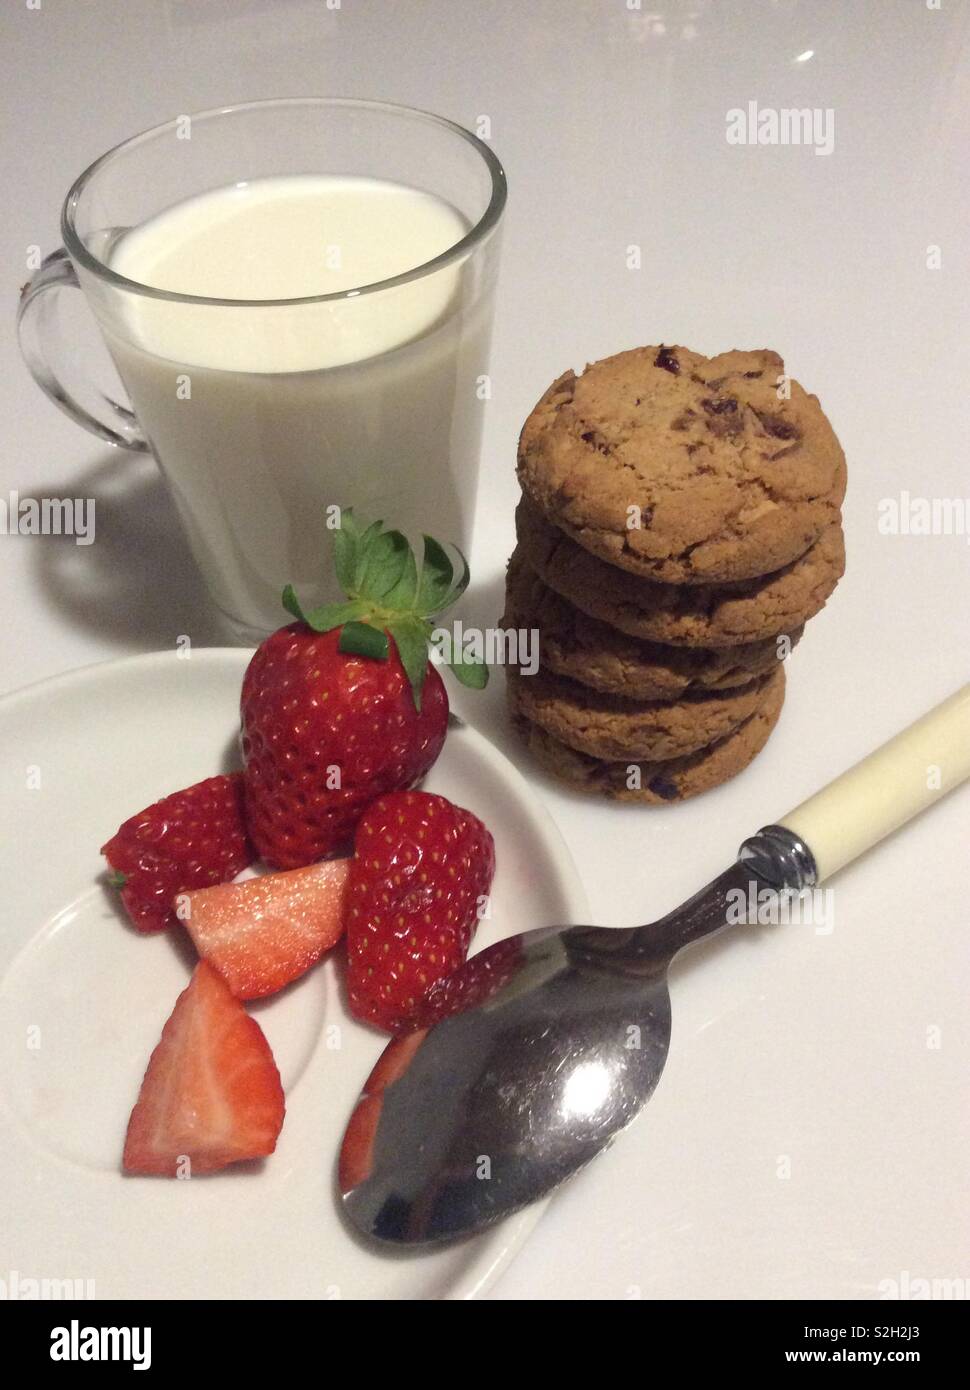 Breakfast with milk, stack of homemade cranberry and chocolate cookies and fresh strawberries Stock Photo